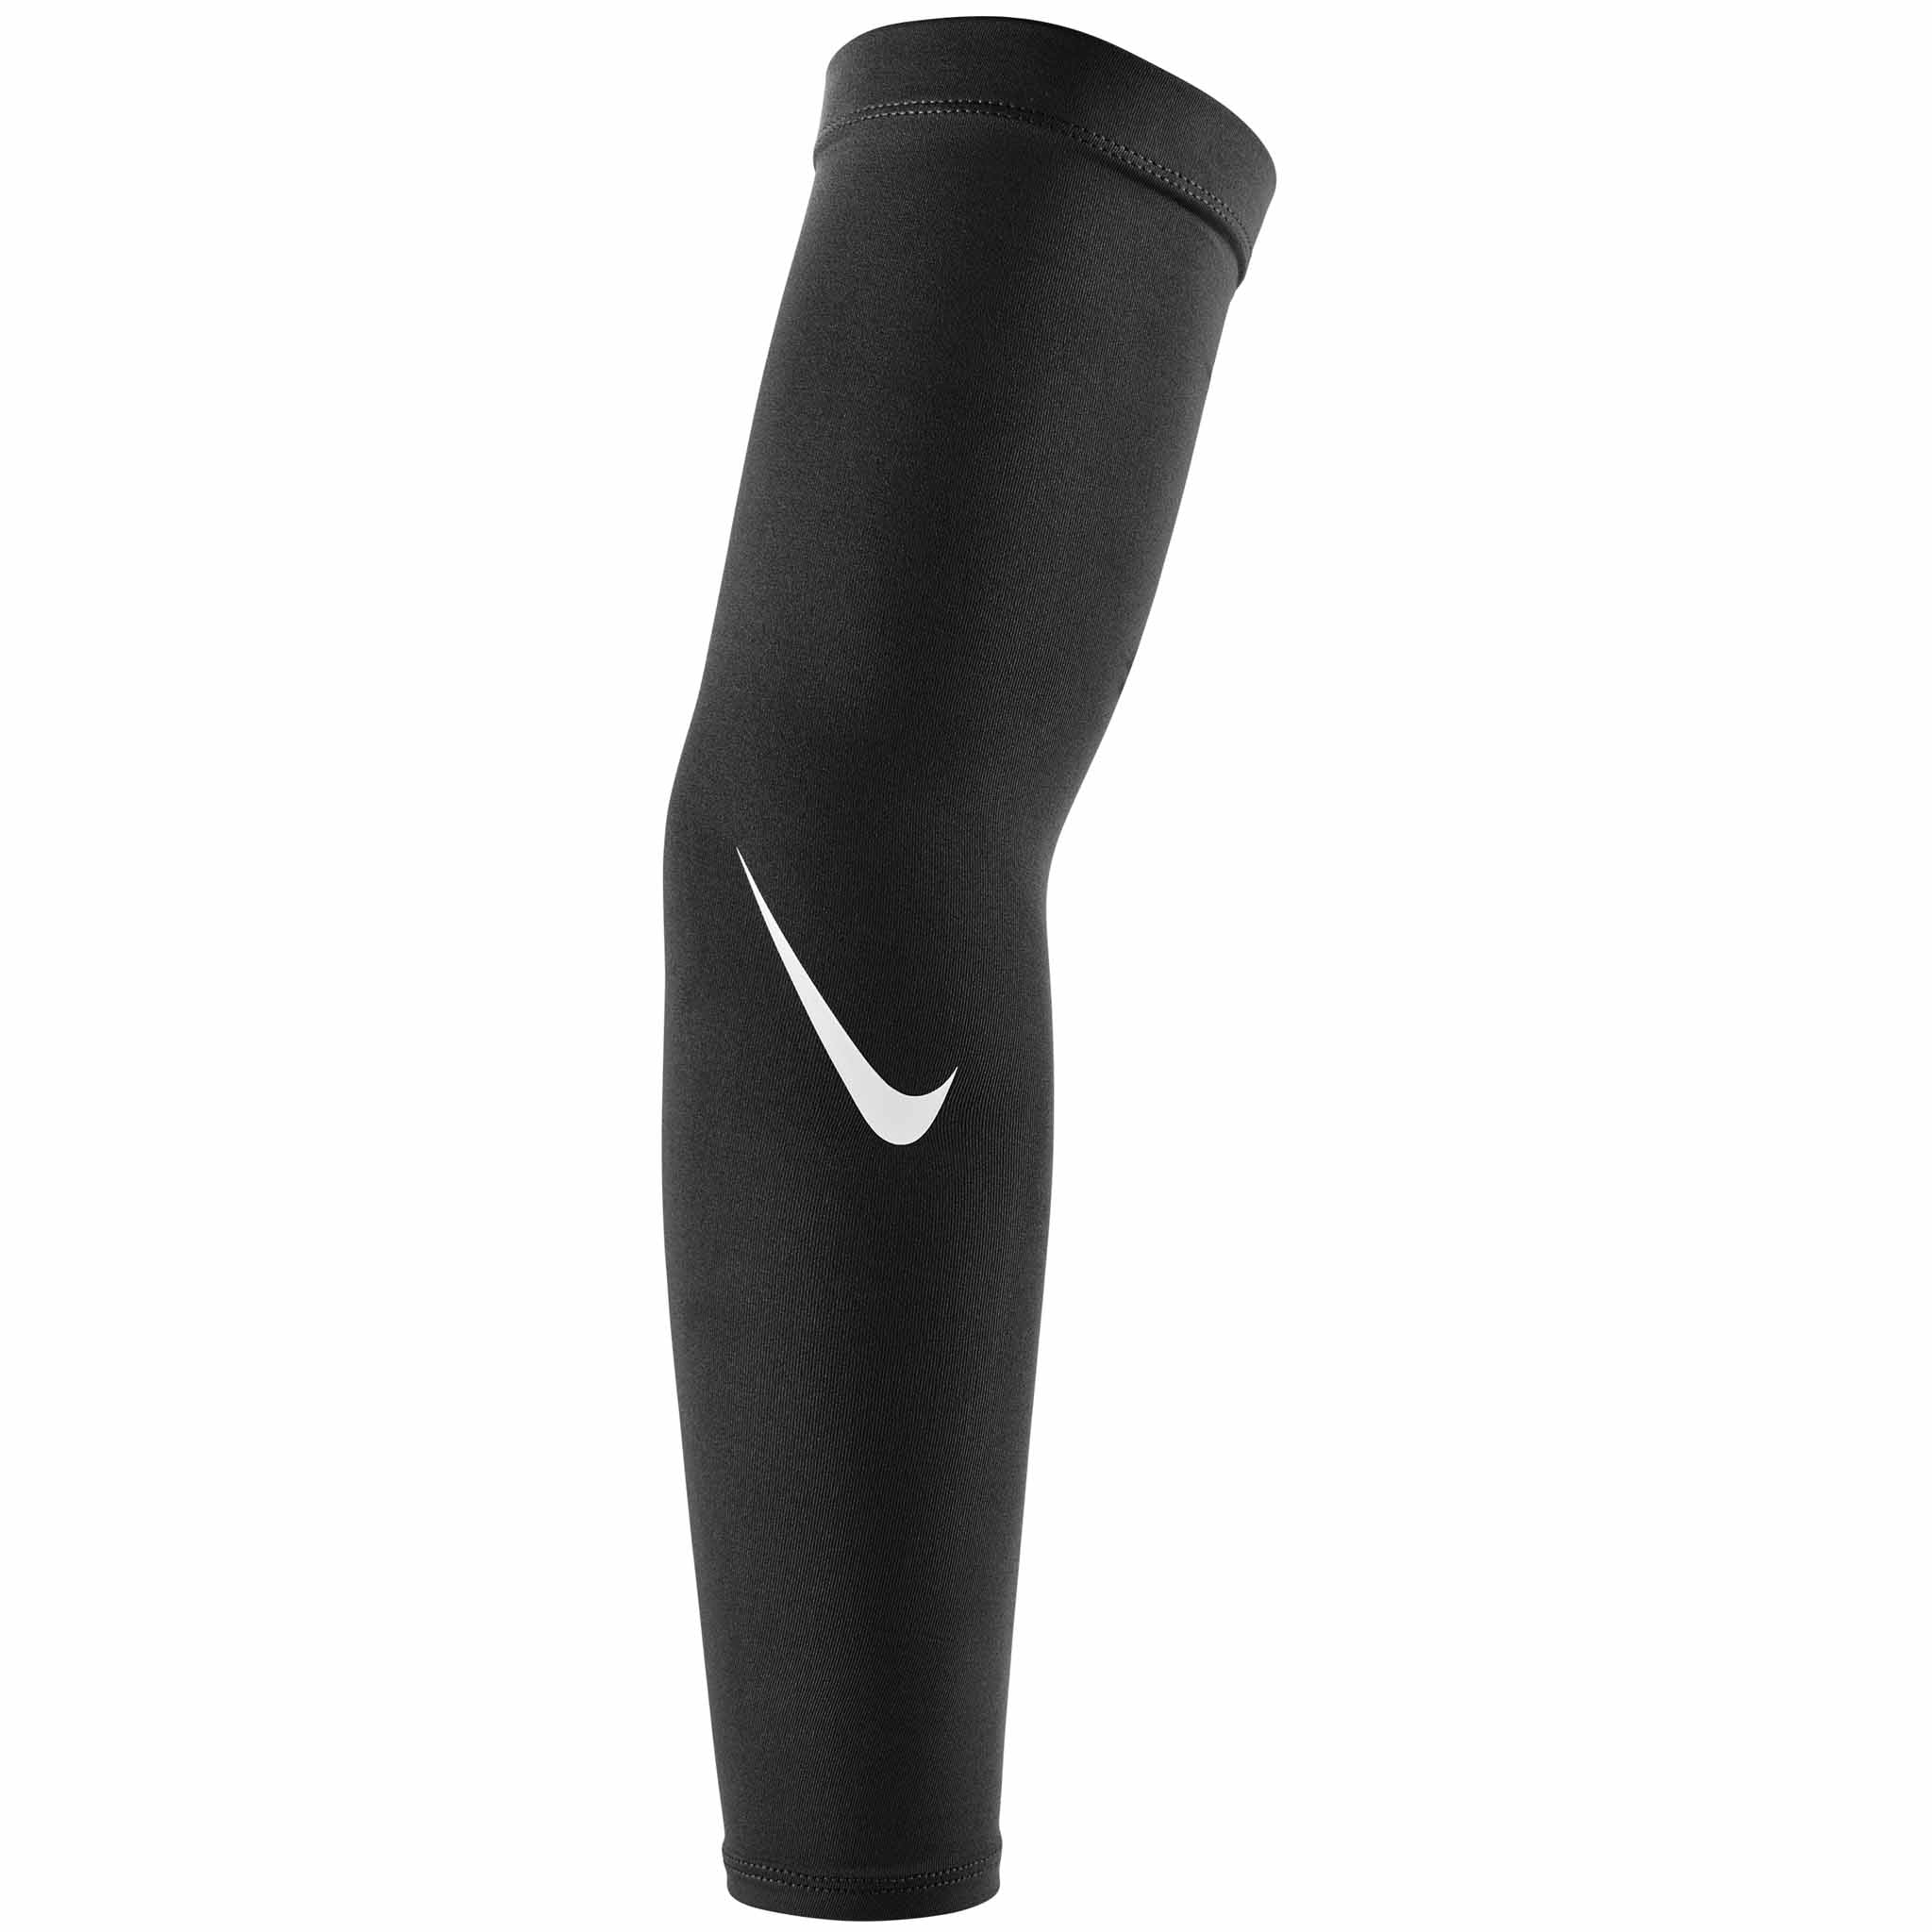 NIKE Pro Adult DRI-FIT 3.0 Football Arm Sleeves Shivers Pink S/M